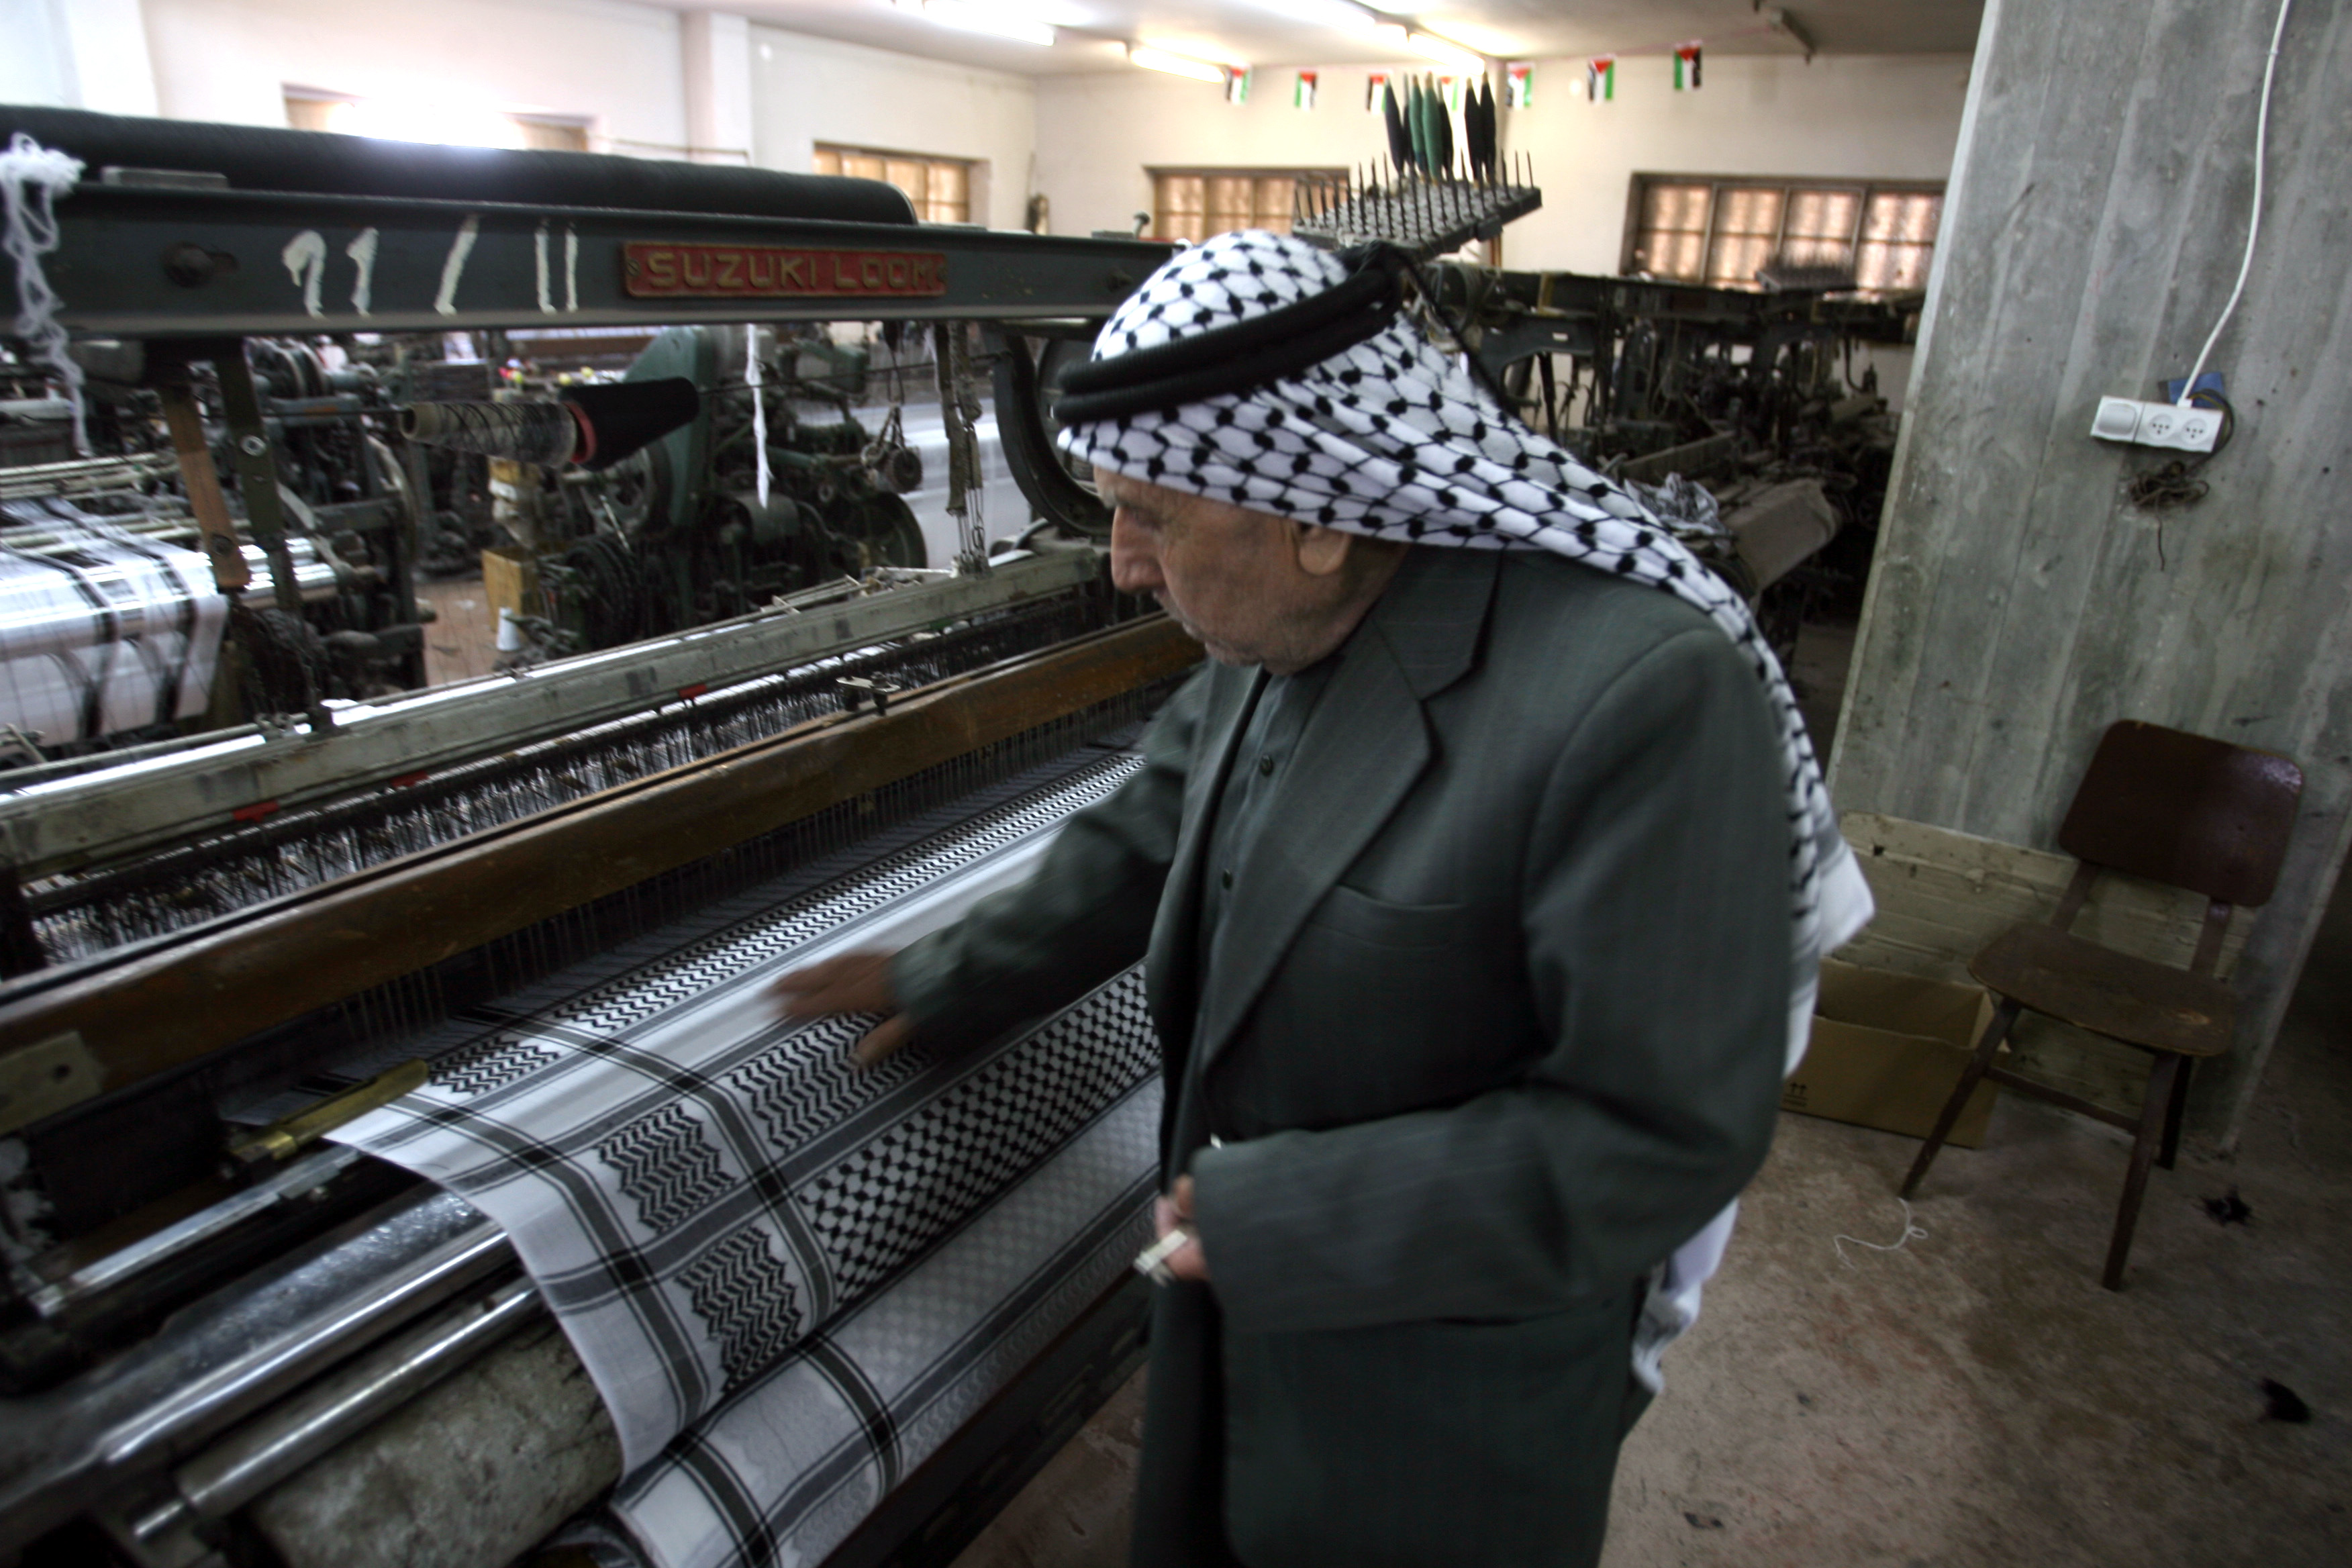 An elderly Palestinian man, Joudeh Hirbawi, is wearing a traditional keffiyeh on his head while standing by a machine at his factory as it sews a black-and-white keffiyeh, the iconic Palestinian scarf.